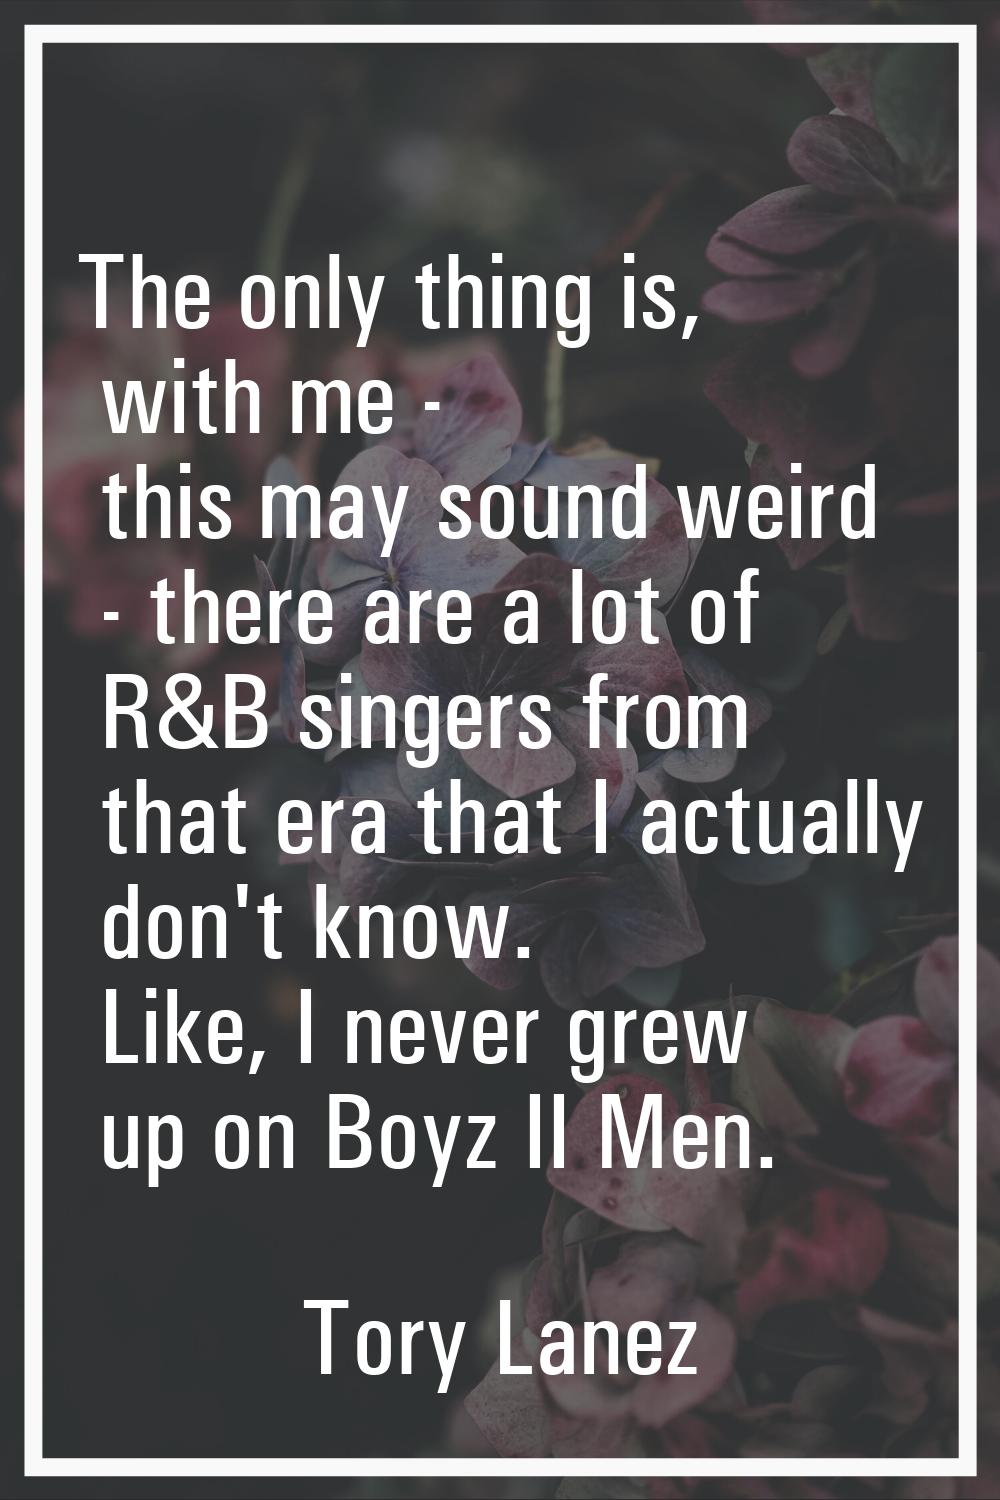 The only thing is, with me - this may sound weird - there are a lot of R&B singers from that era th